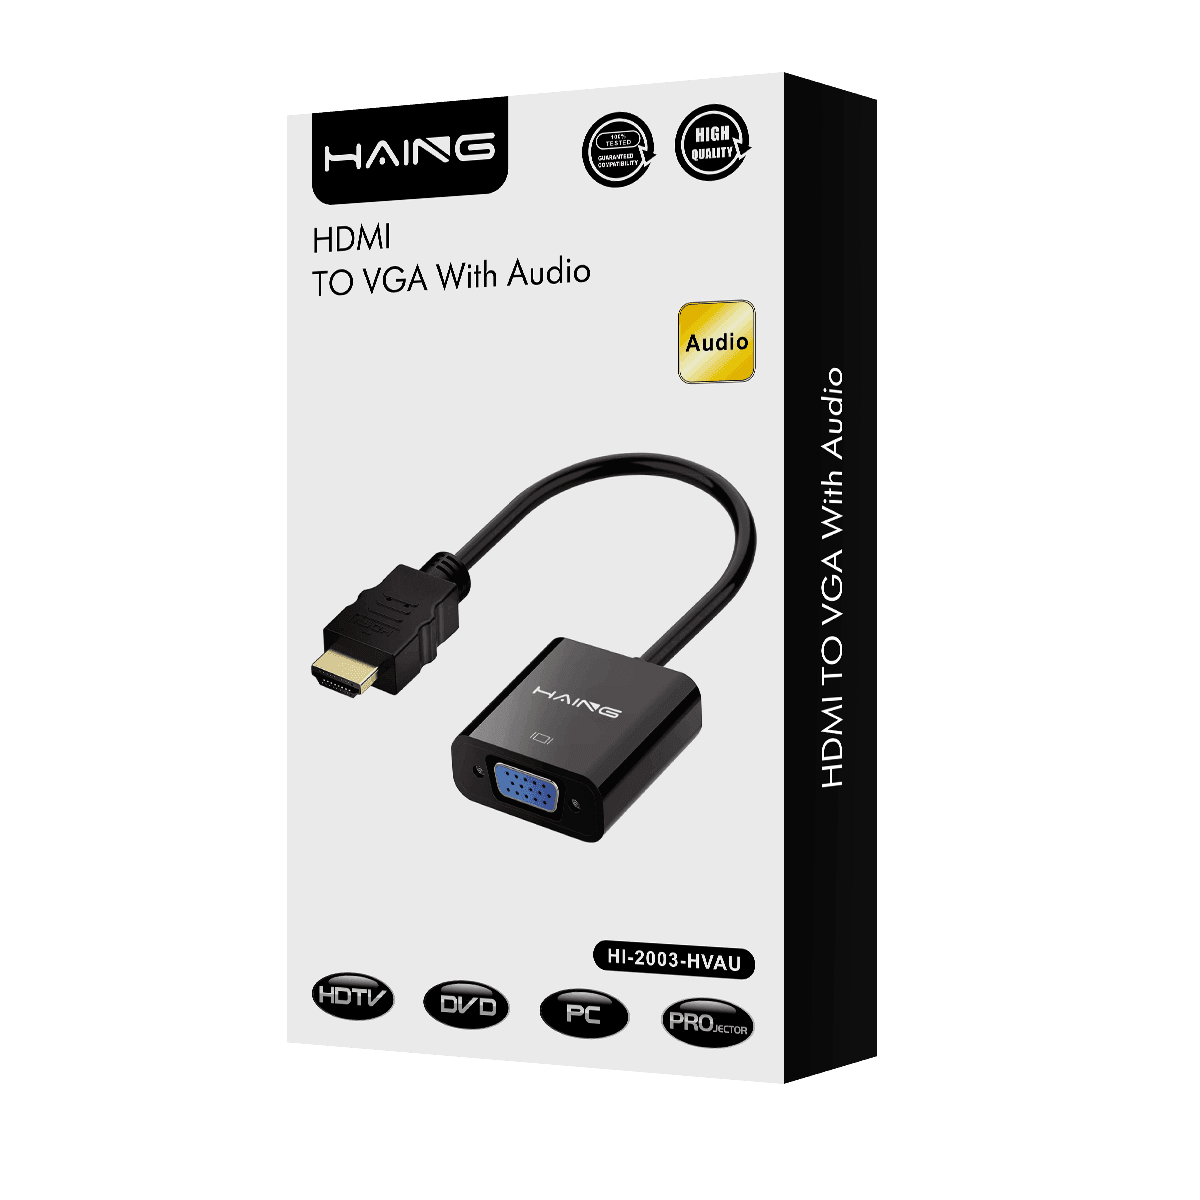 HAING HDMI TO VGA With Audio HIGH QUALITY Cables & Chargers 6 JOD